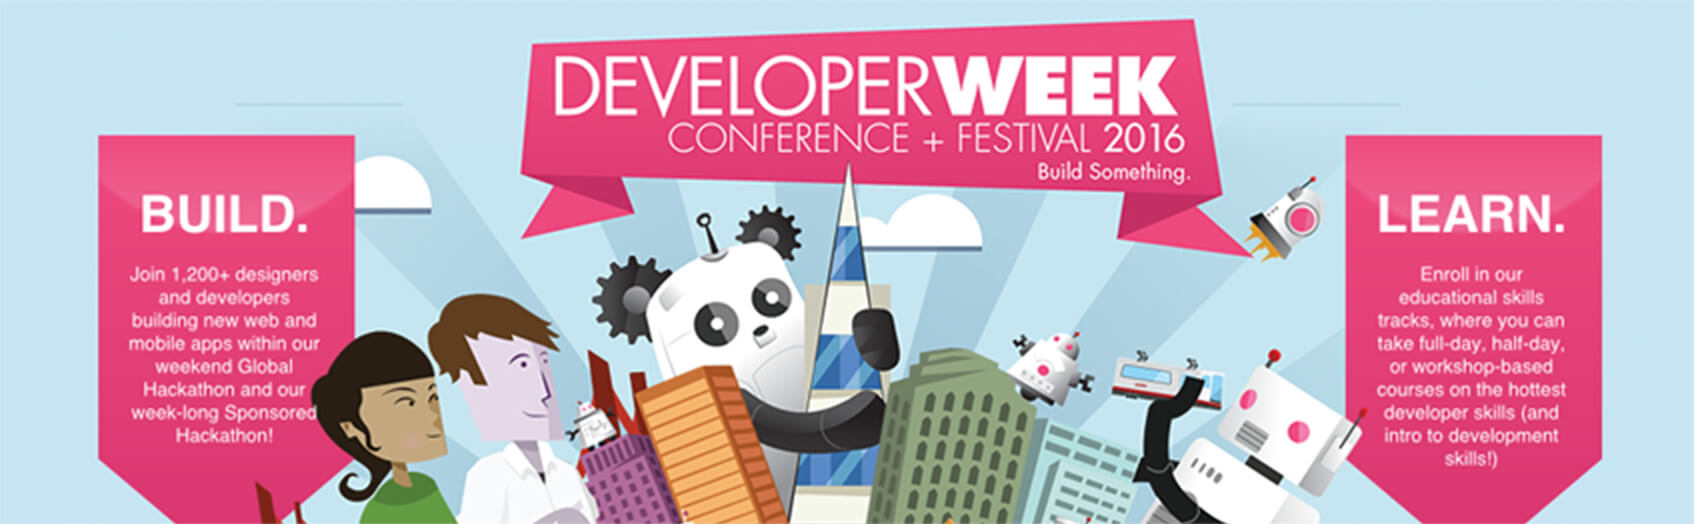 Developer Week Conference in Top tech events 2016 guide by Redwerk